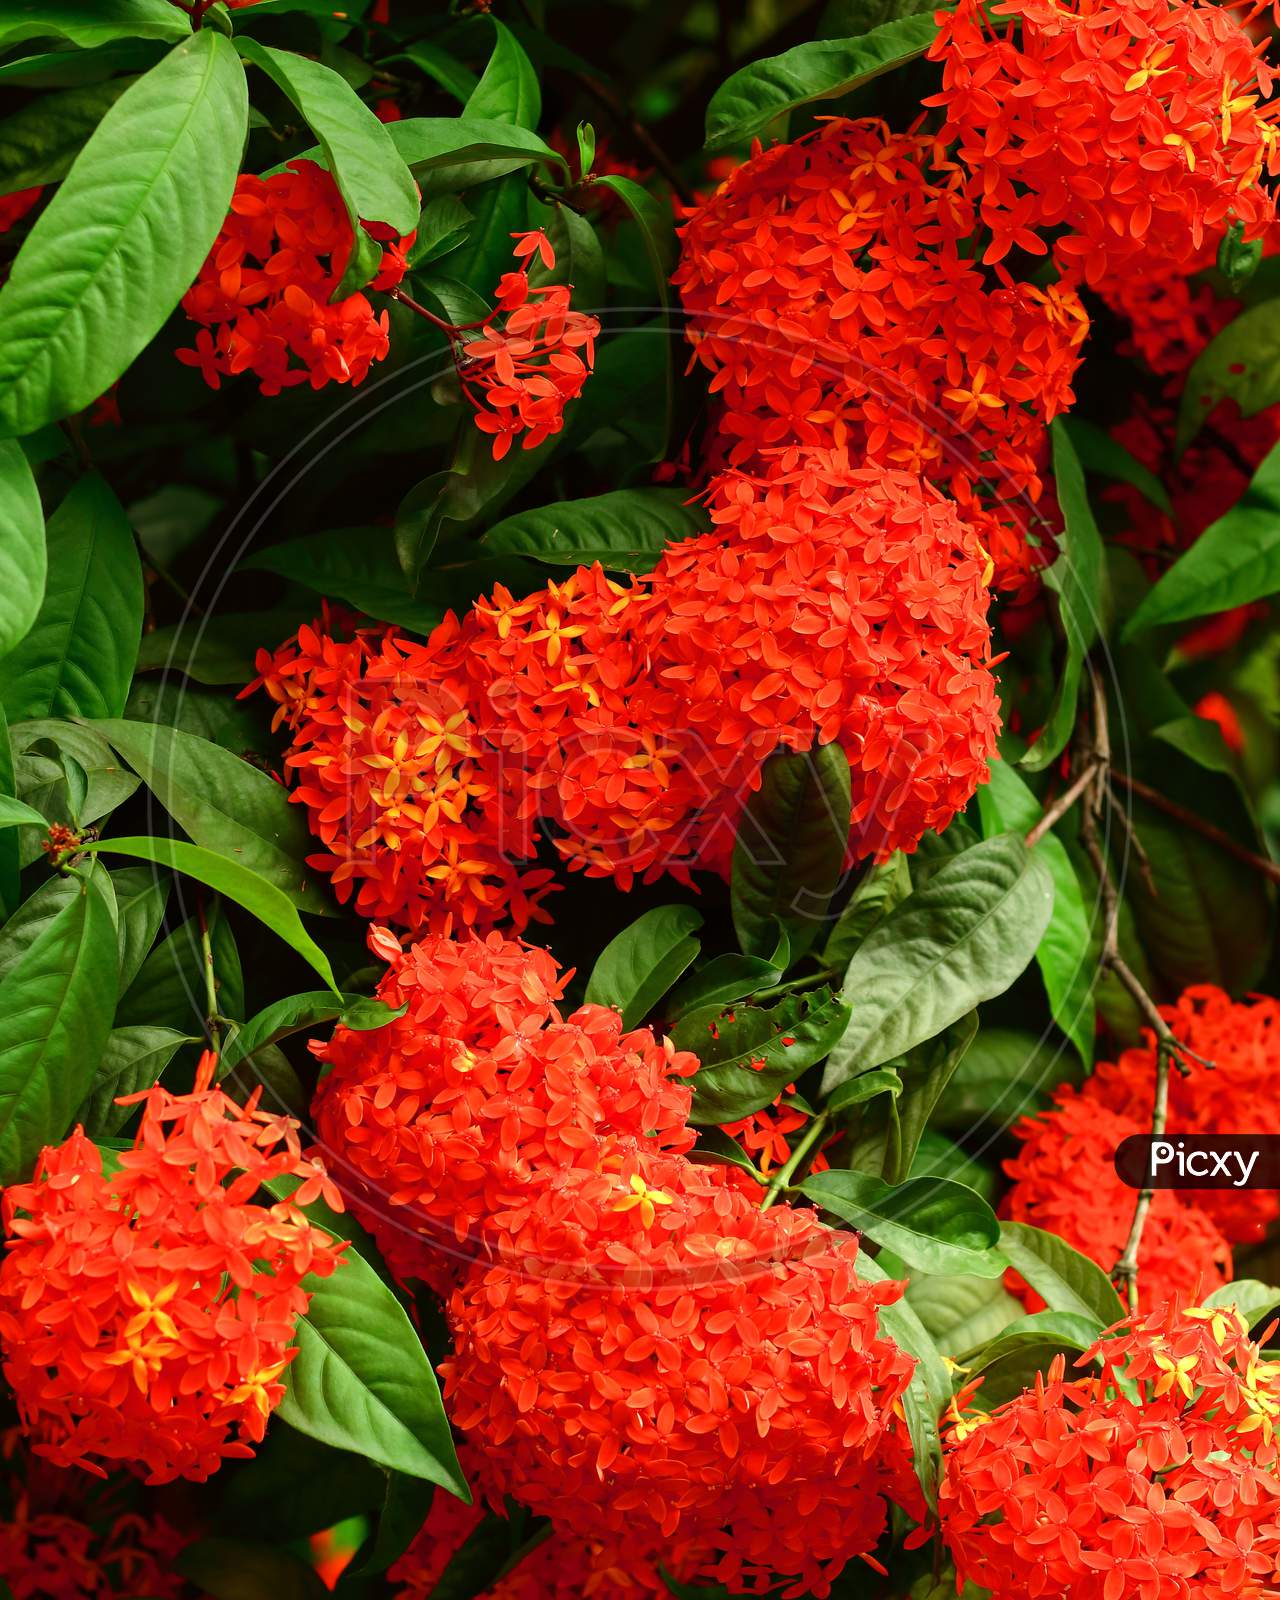 red Ixora coccinea flowers are  blooming in tree. Its looks amazing .